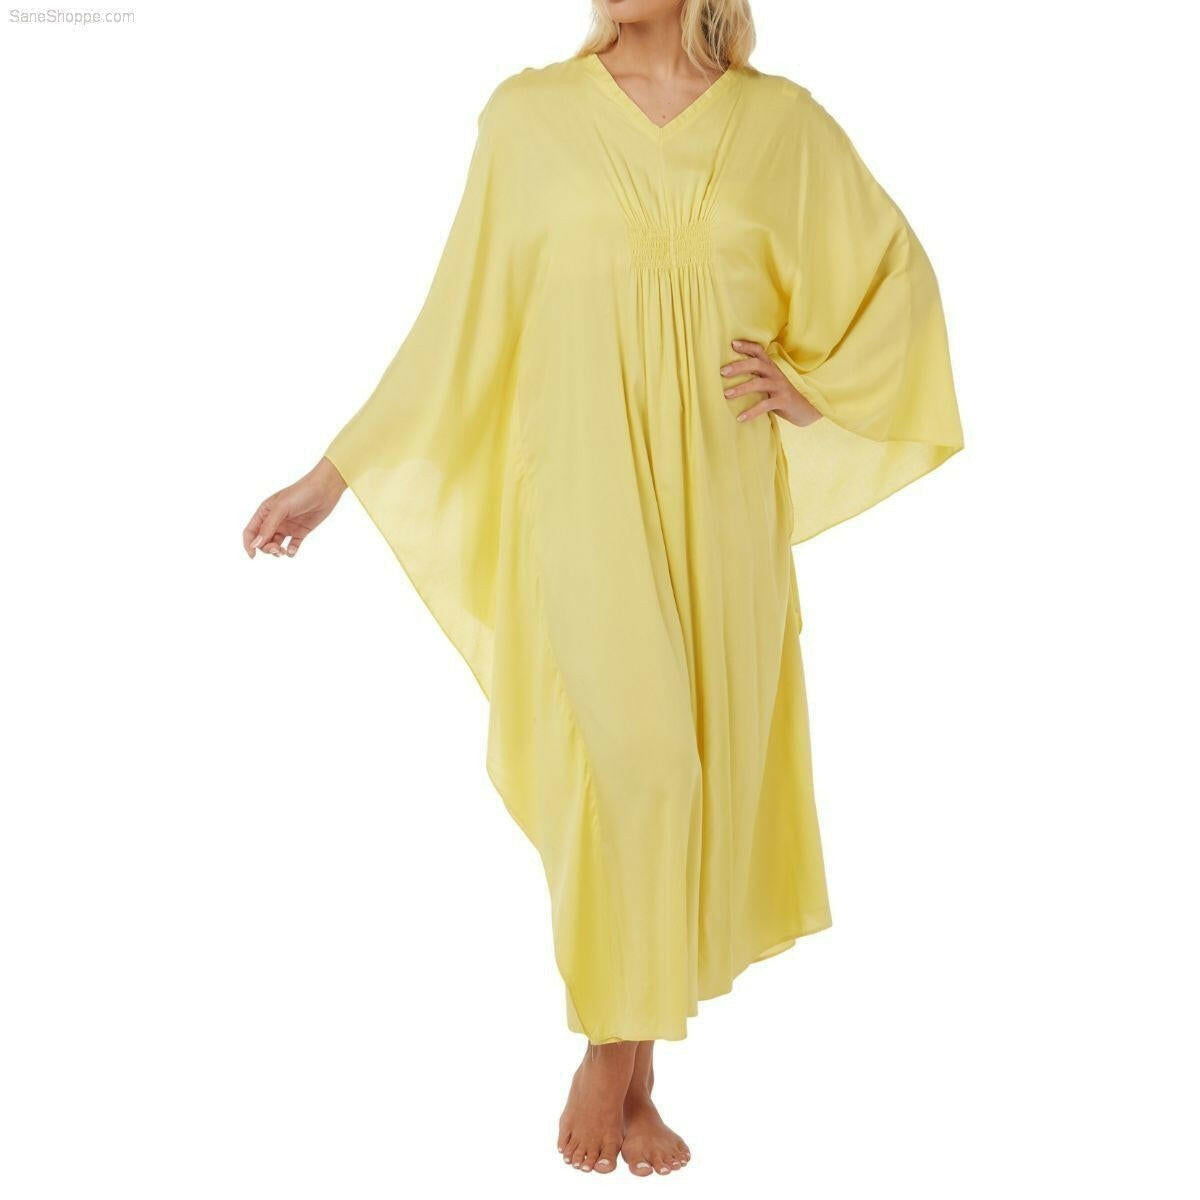 Lightweight Summer Fabric Ladies Poncho Fit All One Size | SaneShoppe